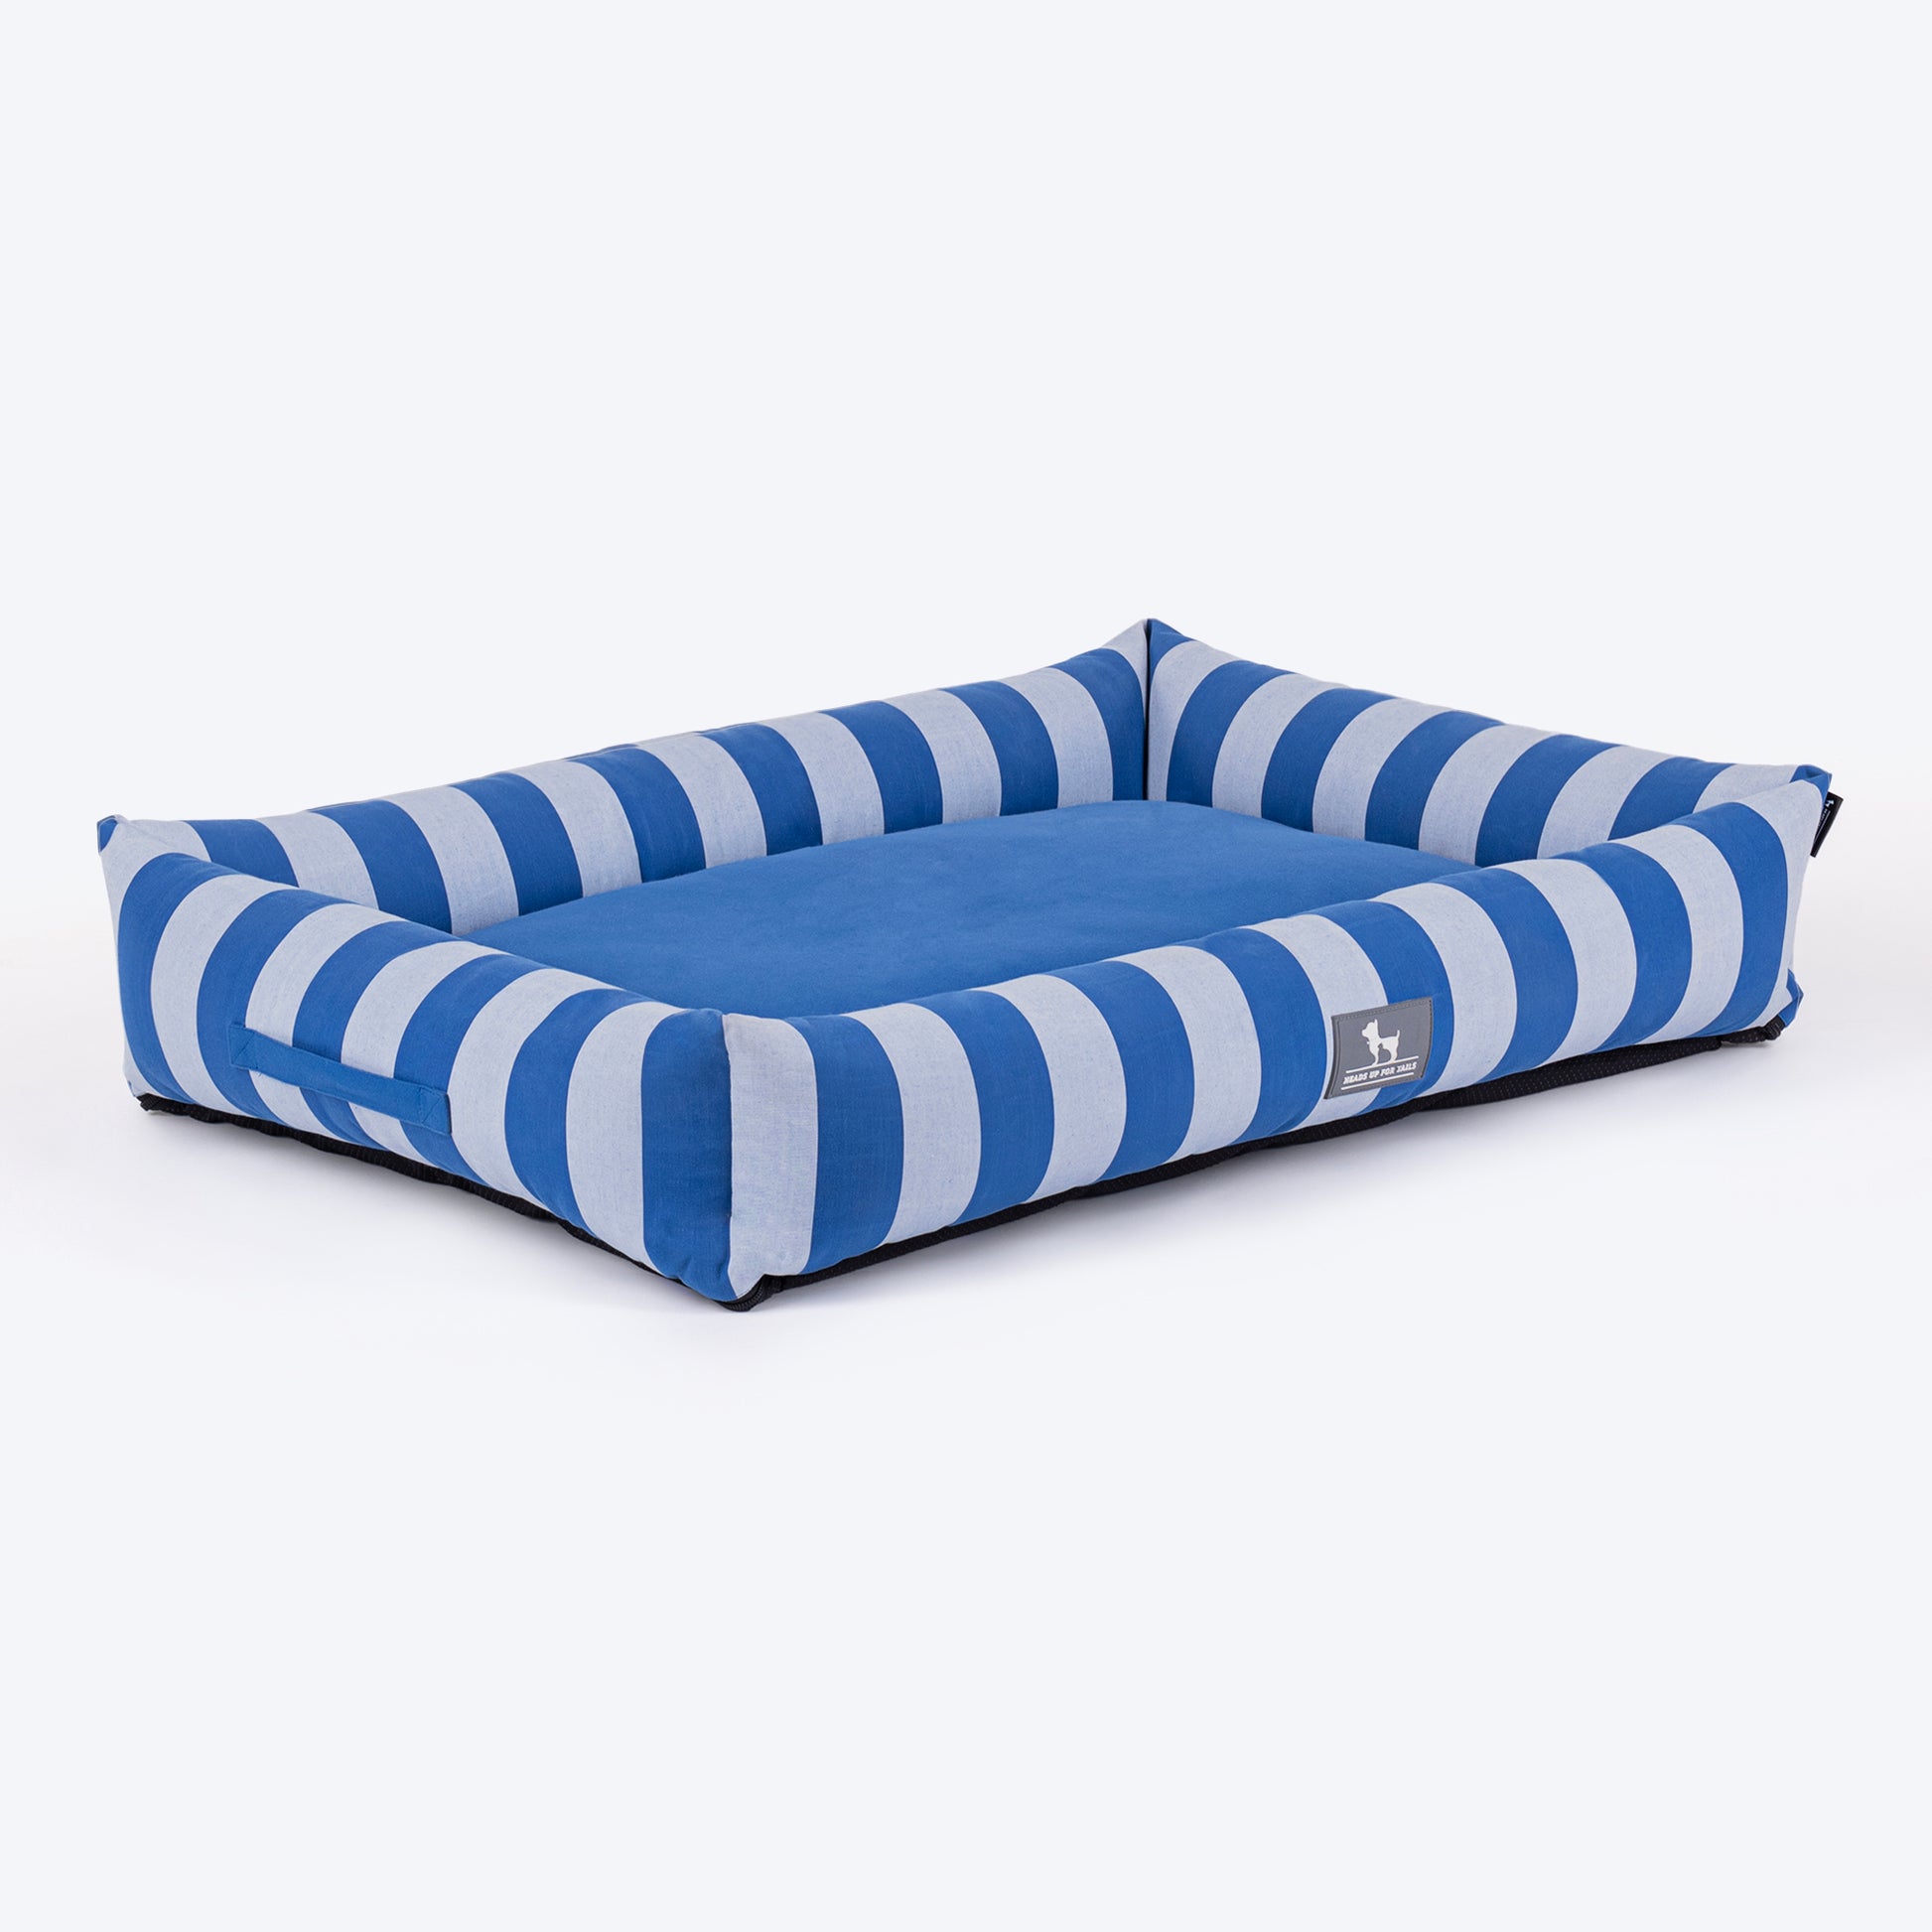 HUFT Stripe Siesta Lounger Dog Bed - Blue & White - Heads Up For Tails